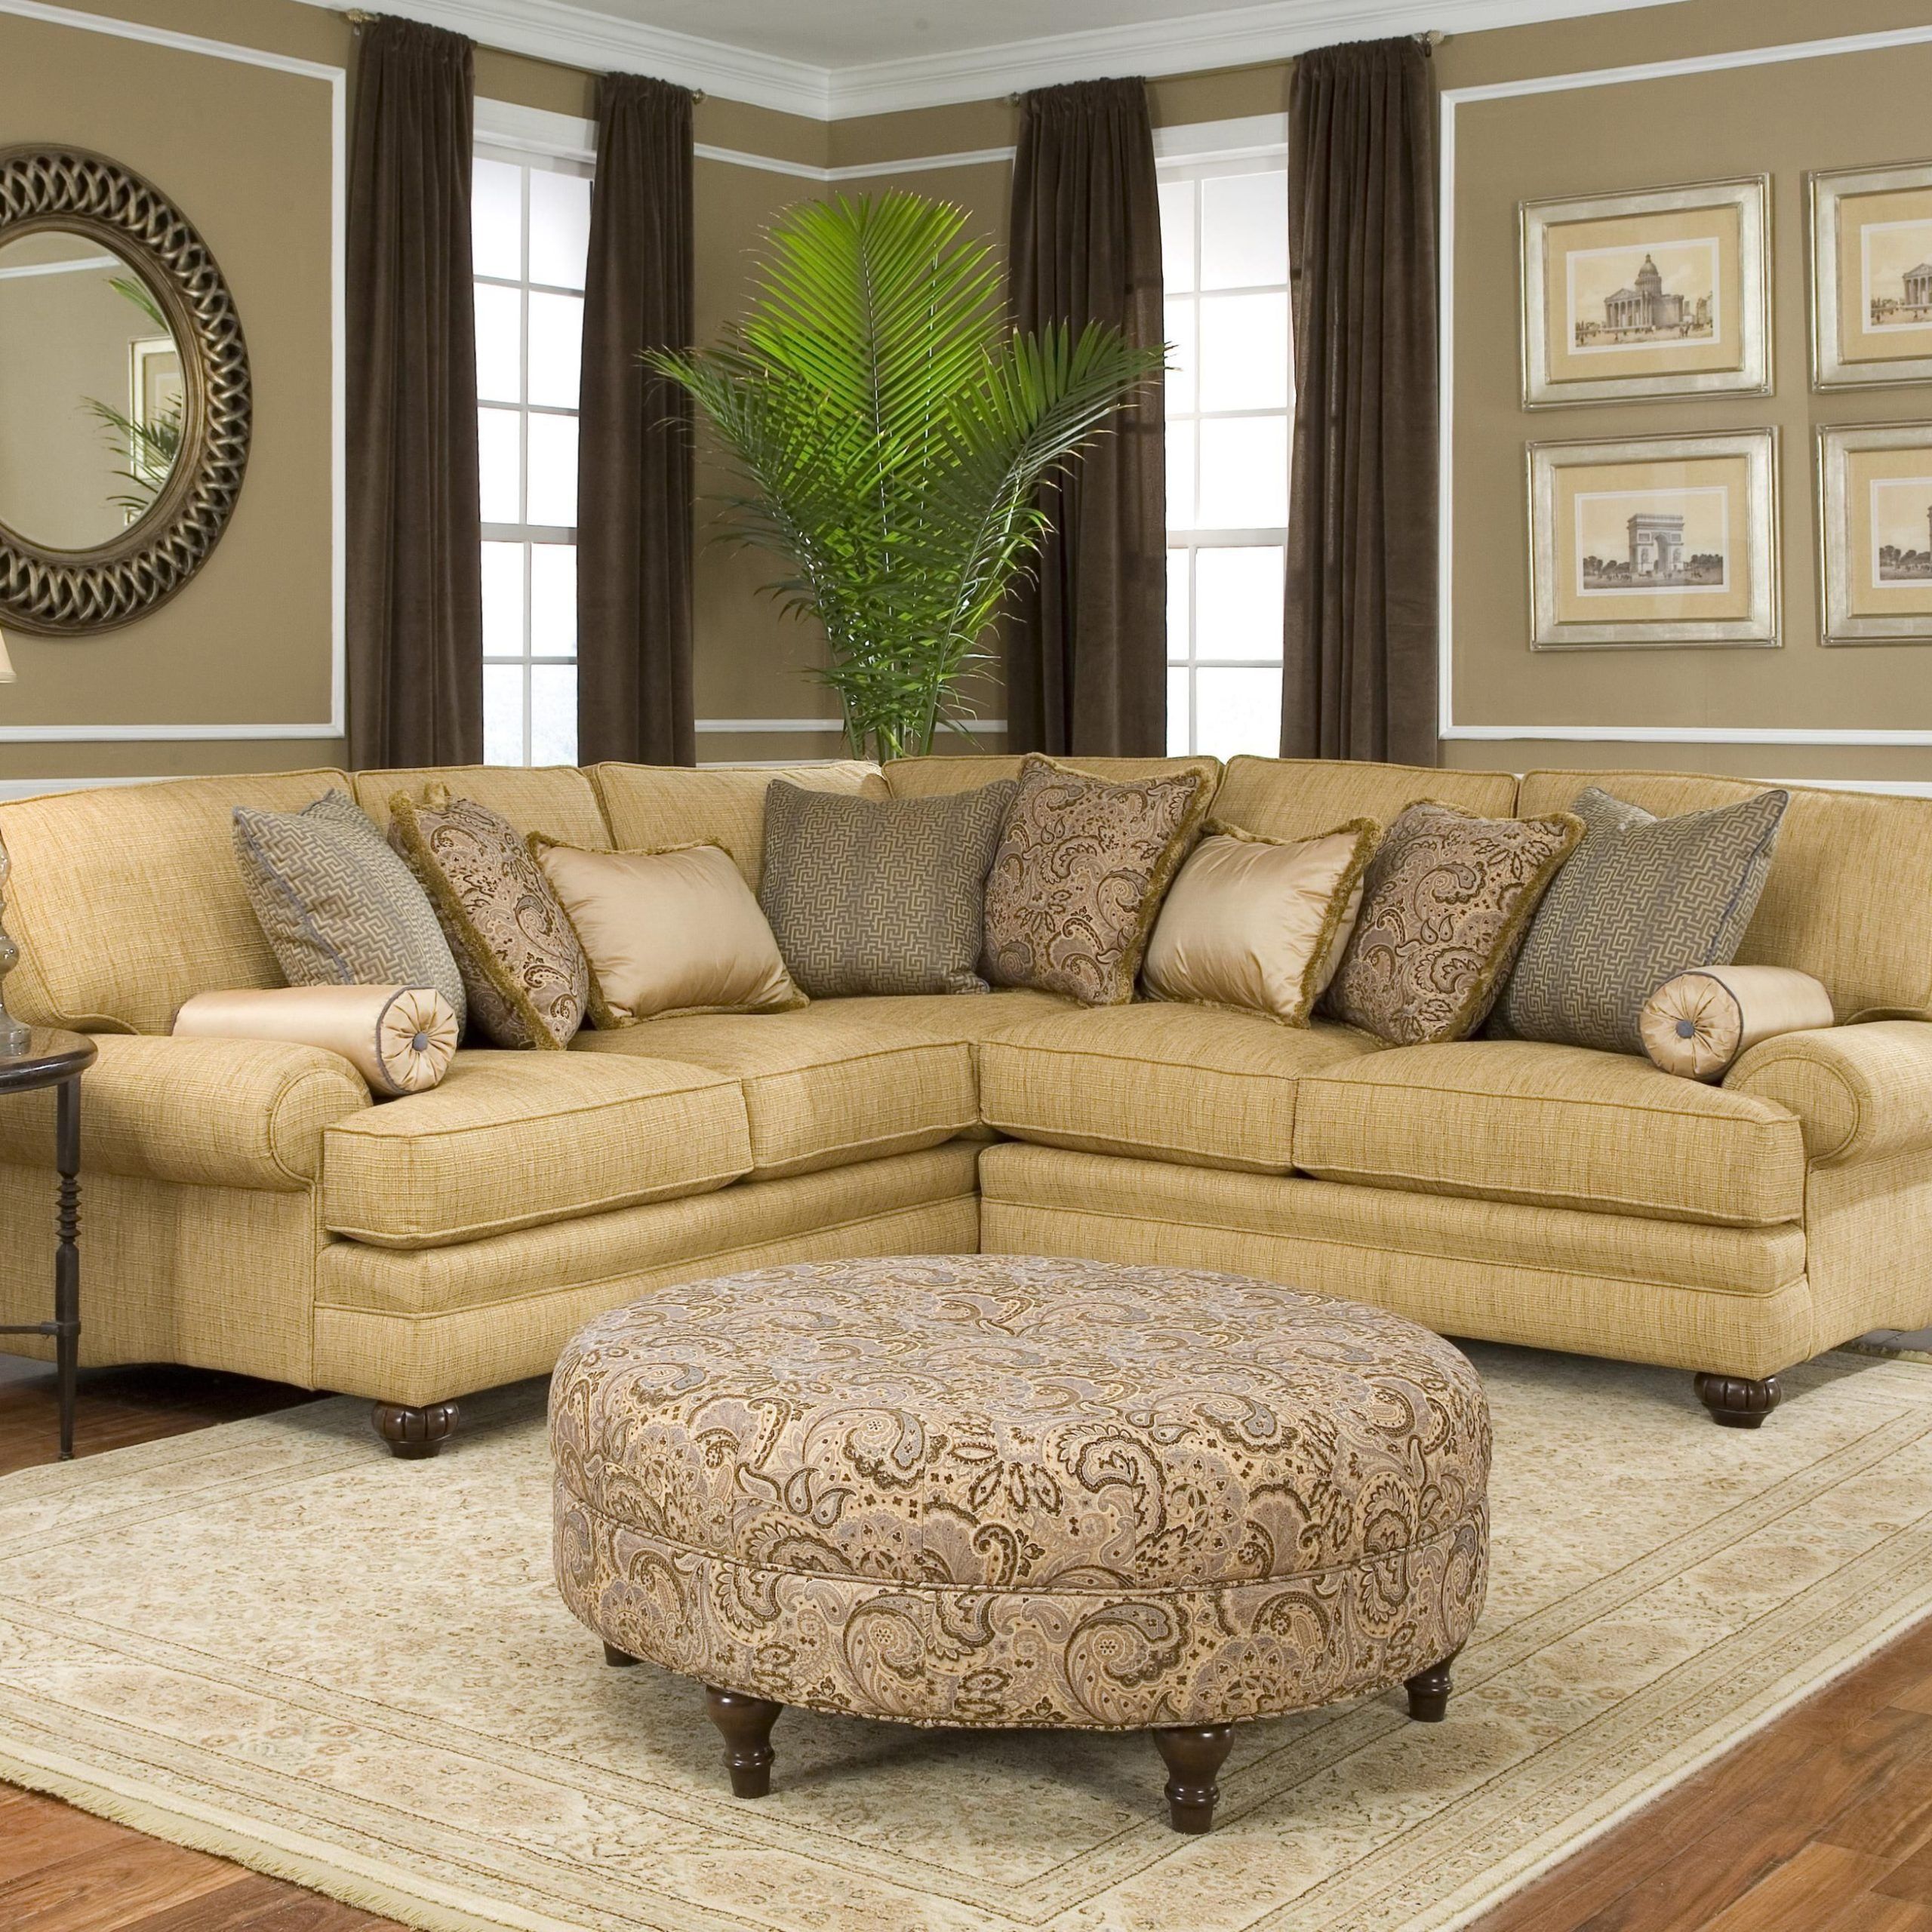 20 Top Traditional Sectional Sofas Living Room Furniture | Sofa Ideas Throughout Sofas For Living Rooms (View 4 of 20)